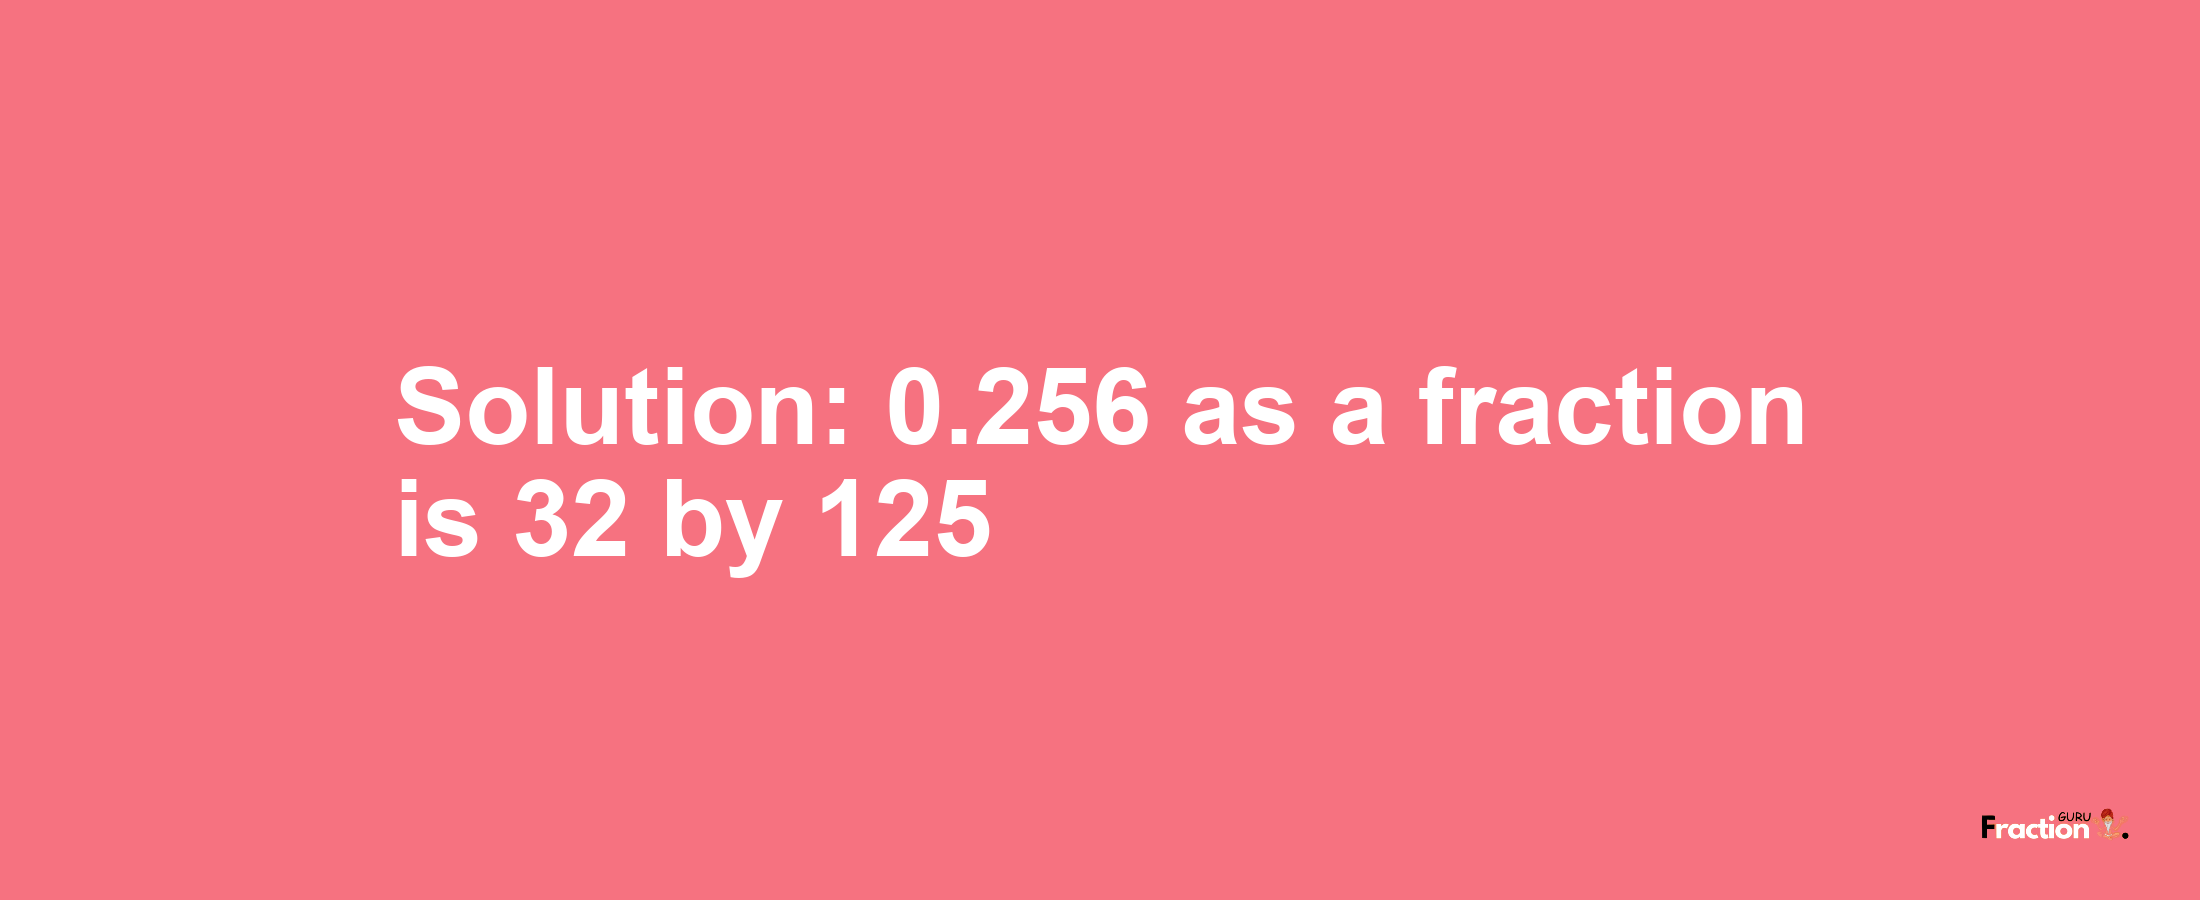 Solution:0.256 as a fraction is 32/125